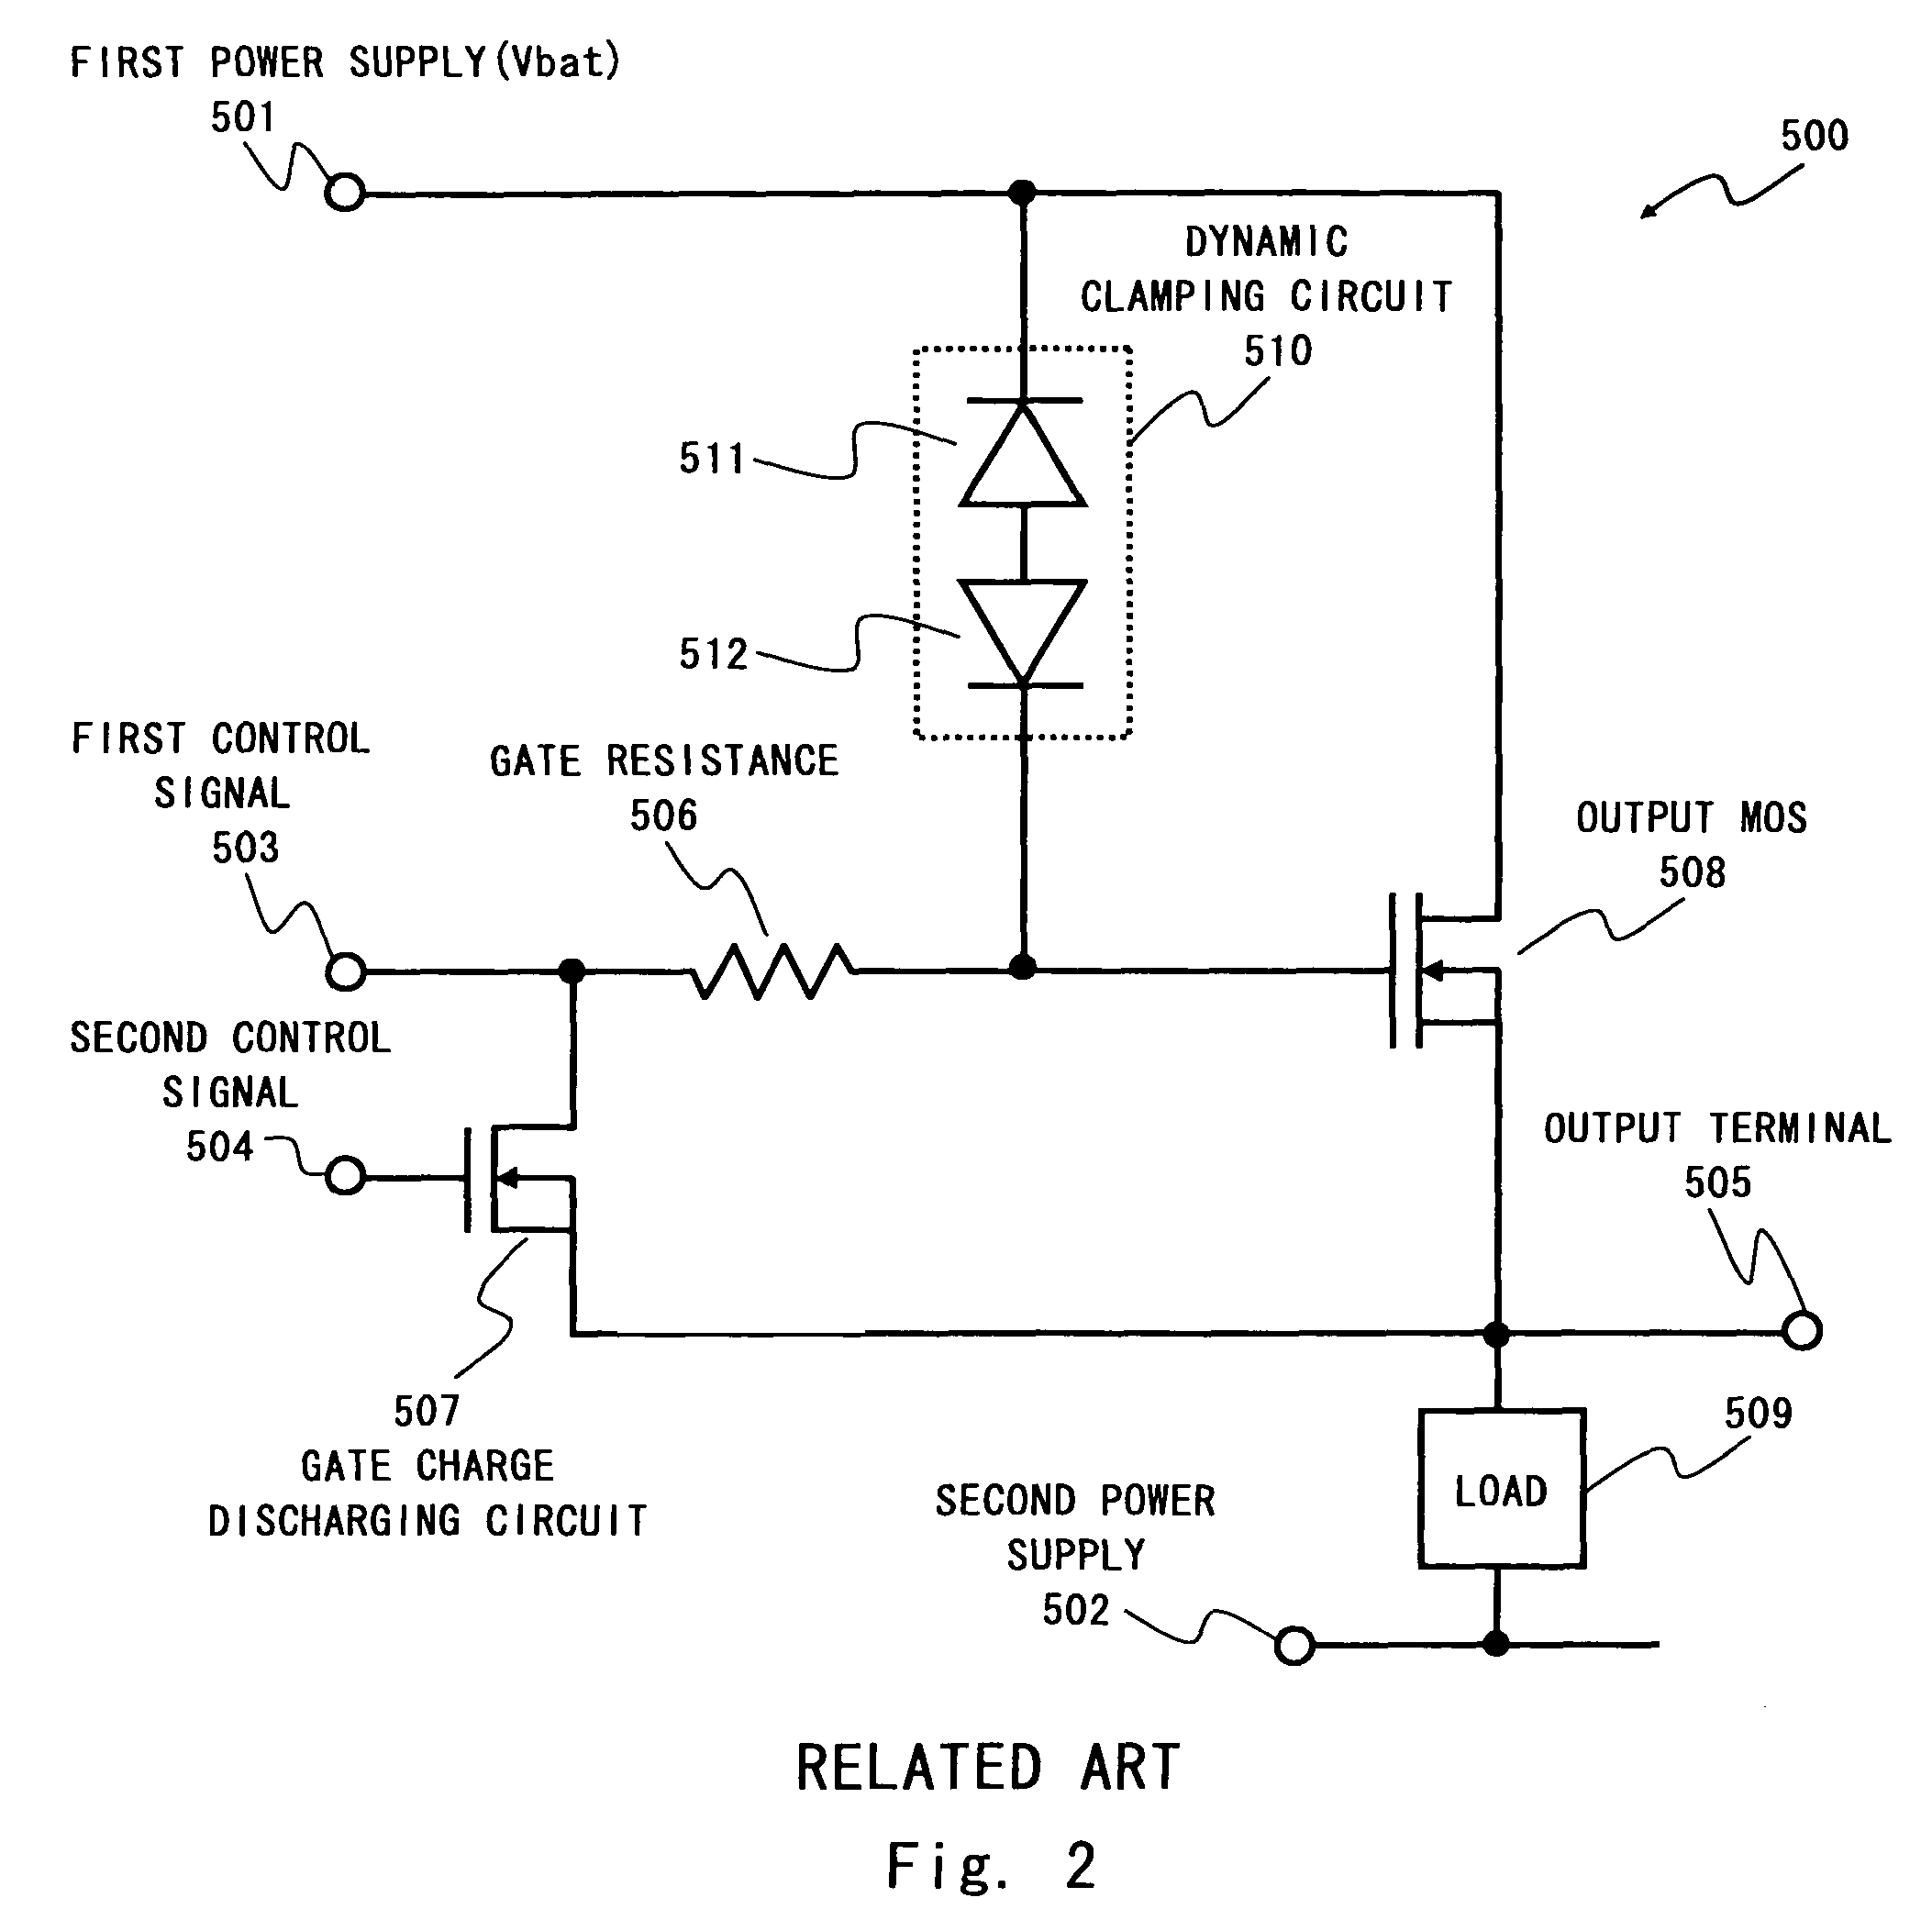 Overvoltage protection circuit